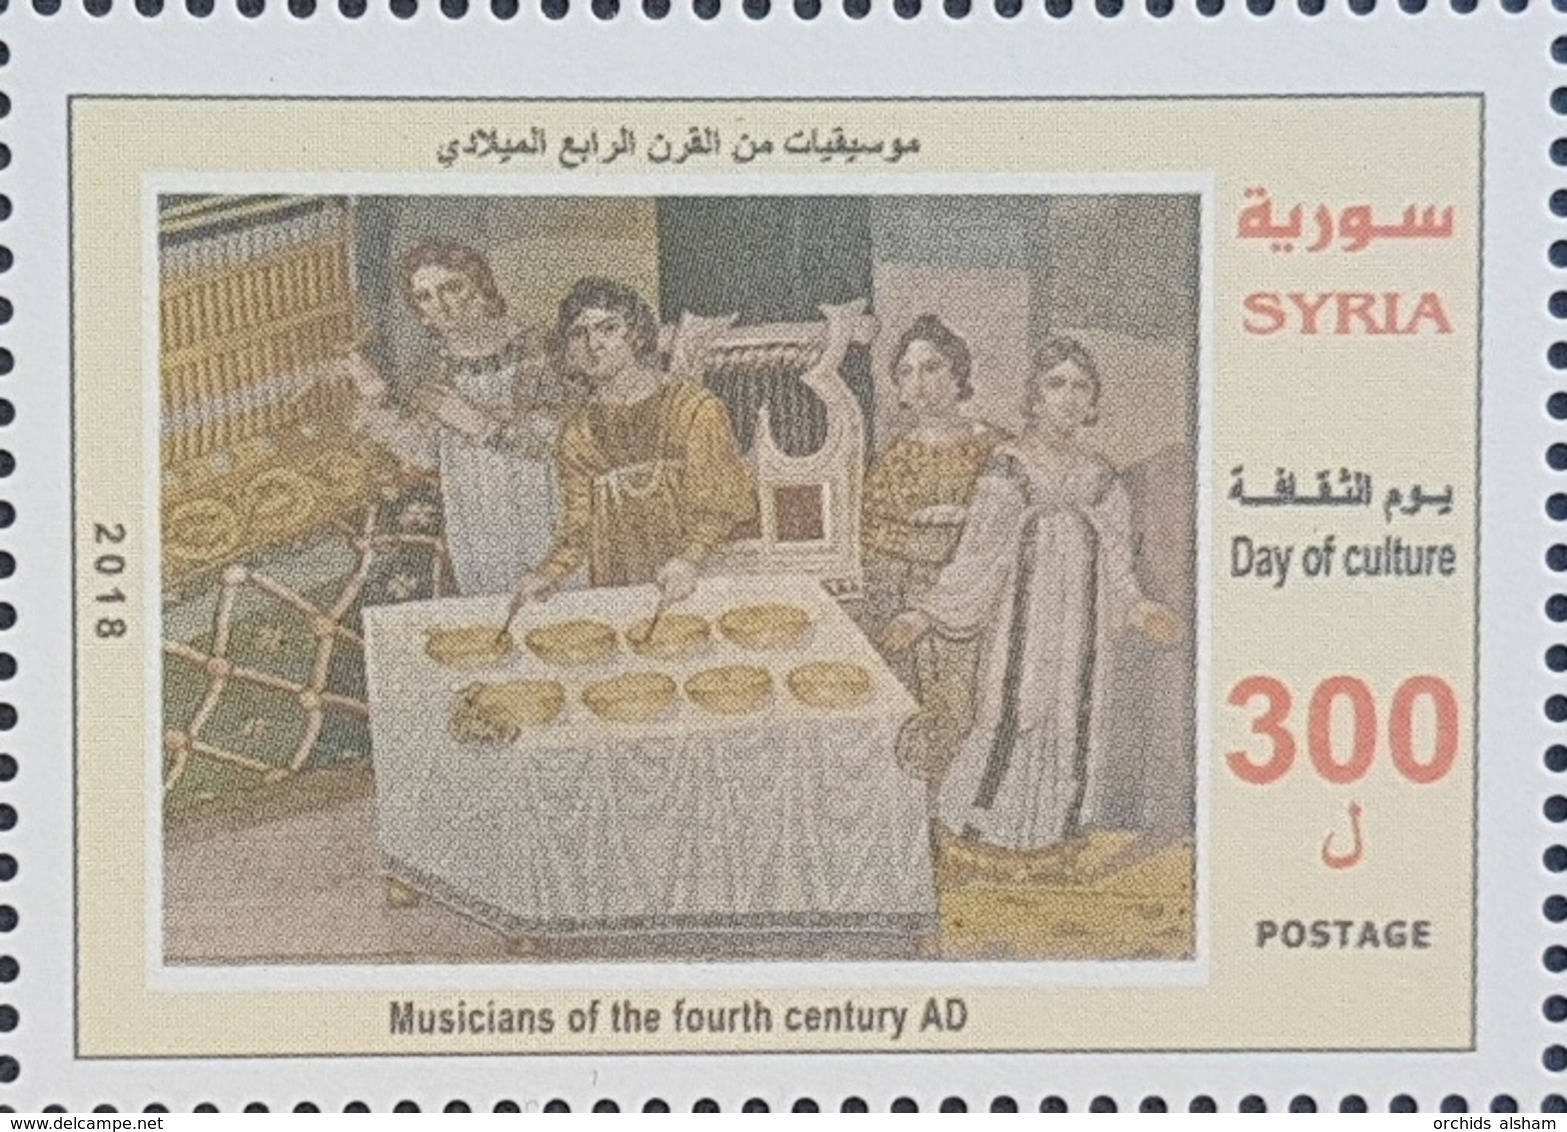 SYRIA NEW 2019 MNH Stamp - Day Of Culture, Music, Musicians Of The 4th Century - Syrie